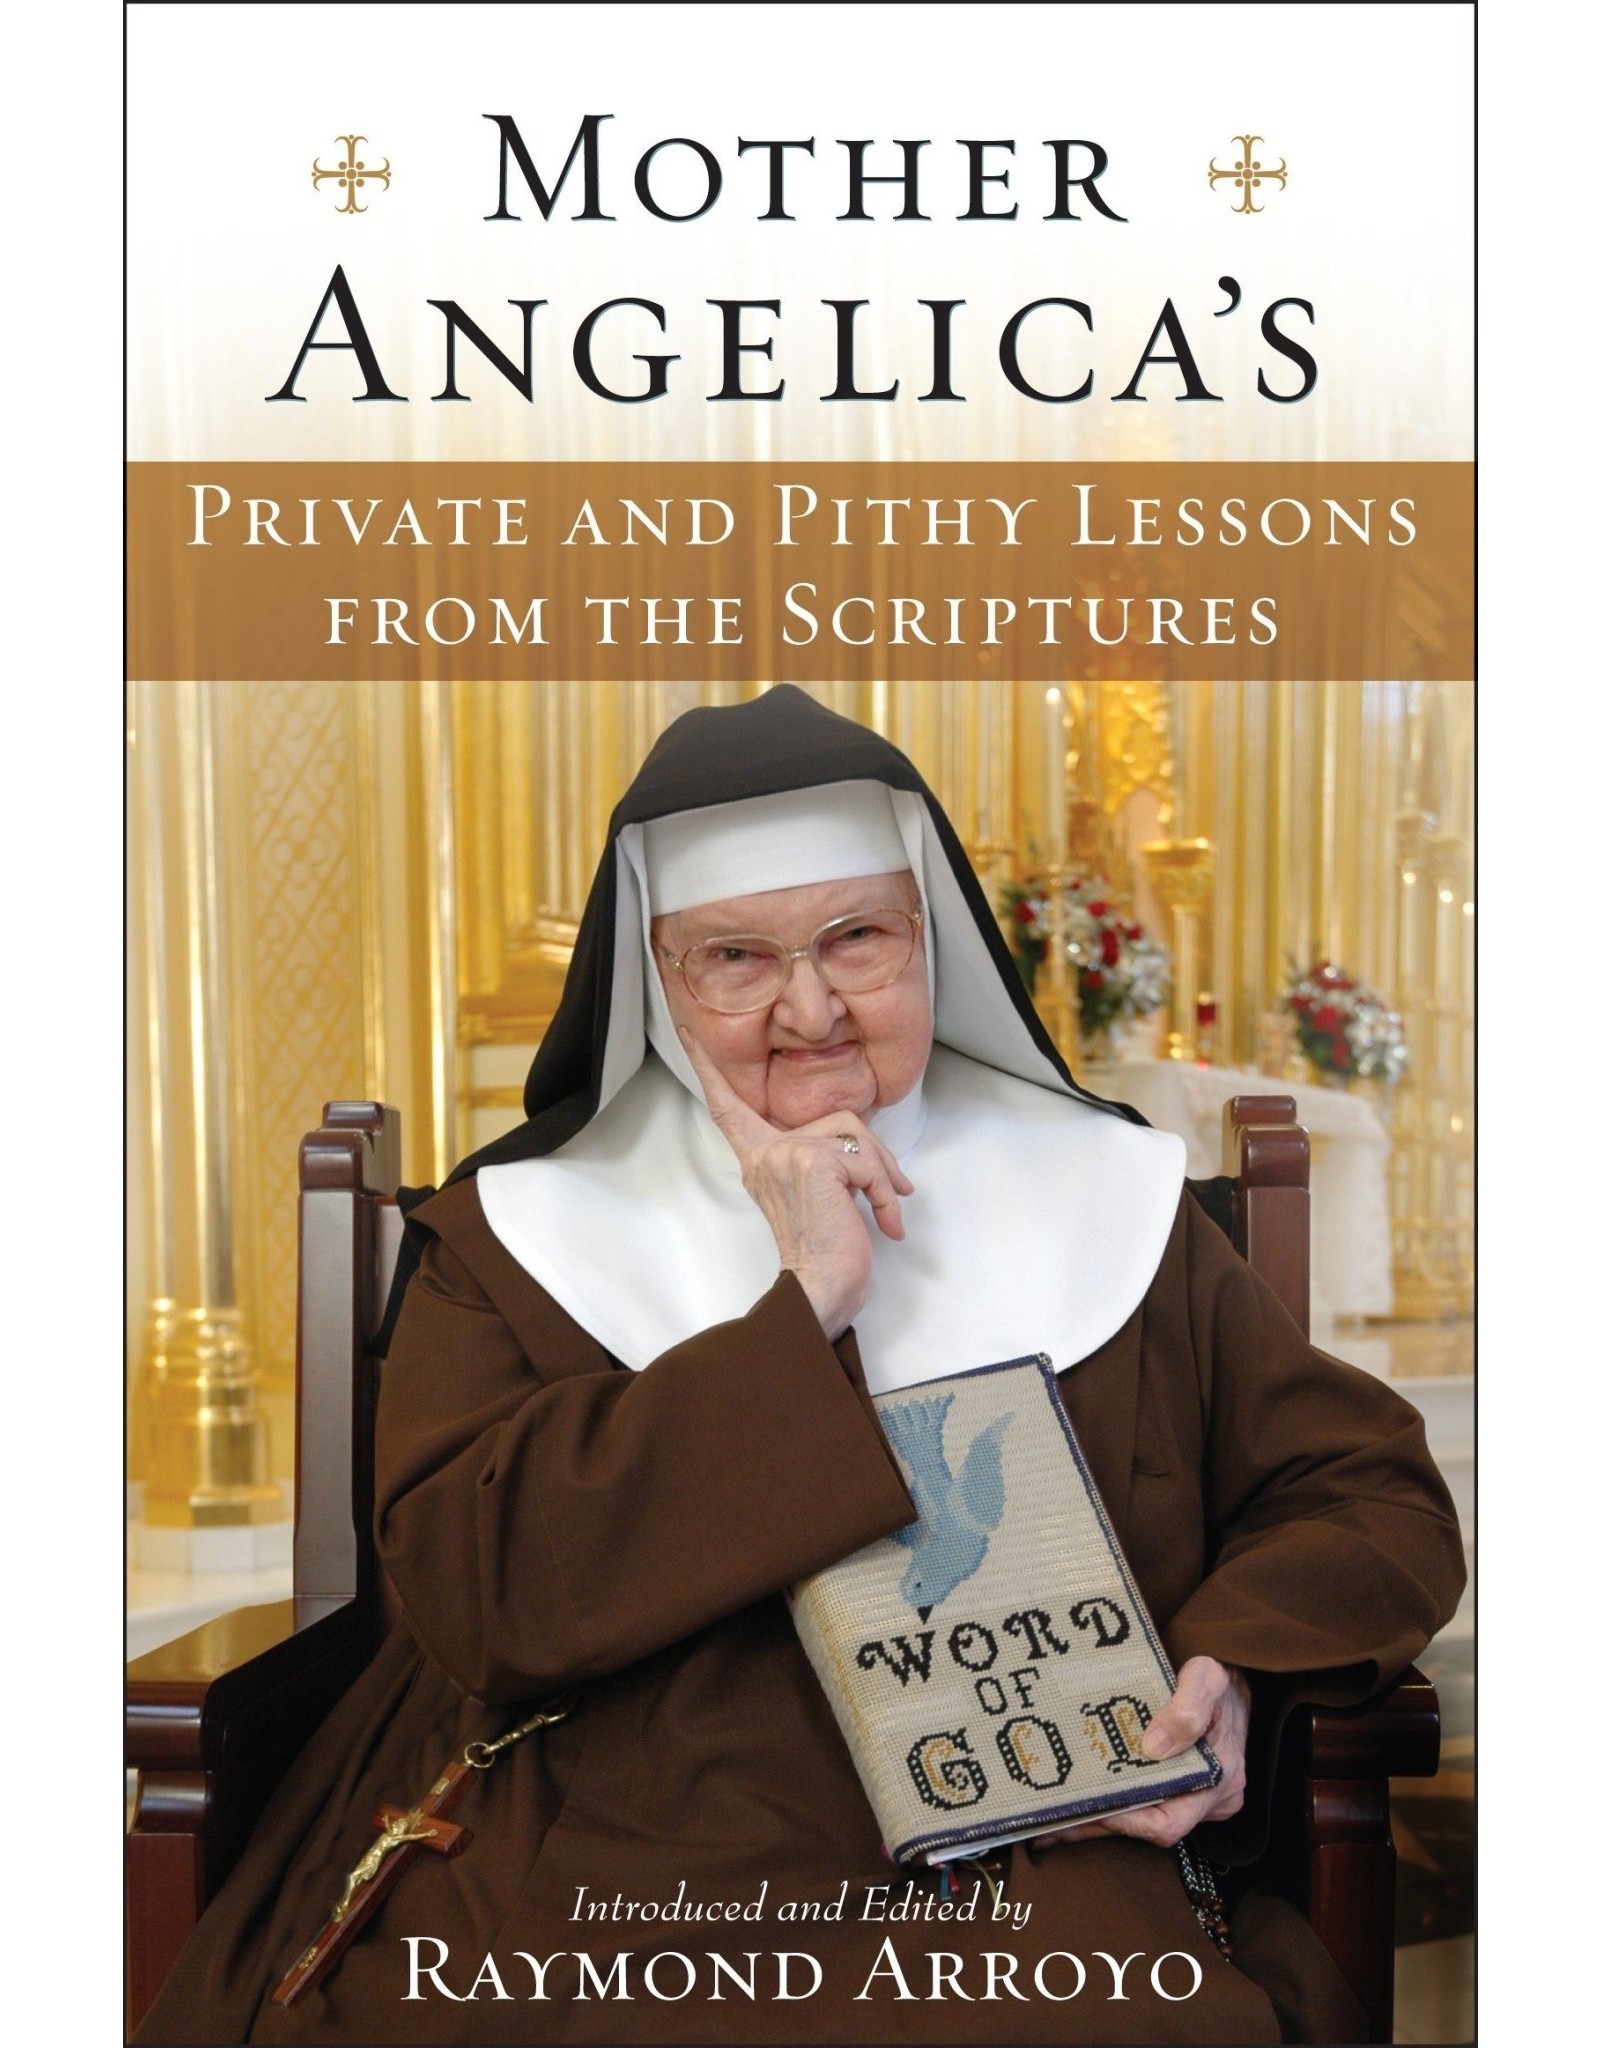 Image Mother Angelica's Private & Pithy Lessons from the Scriptures